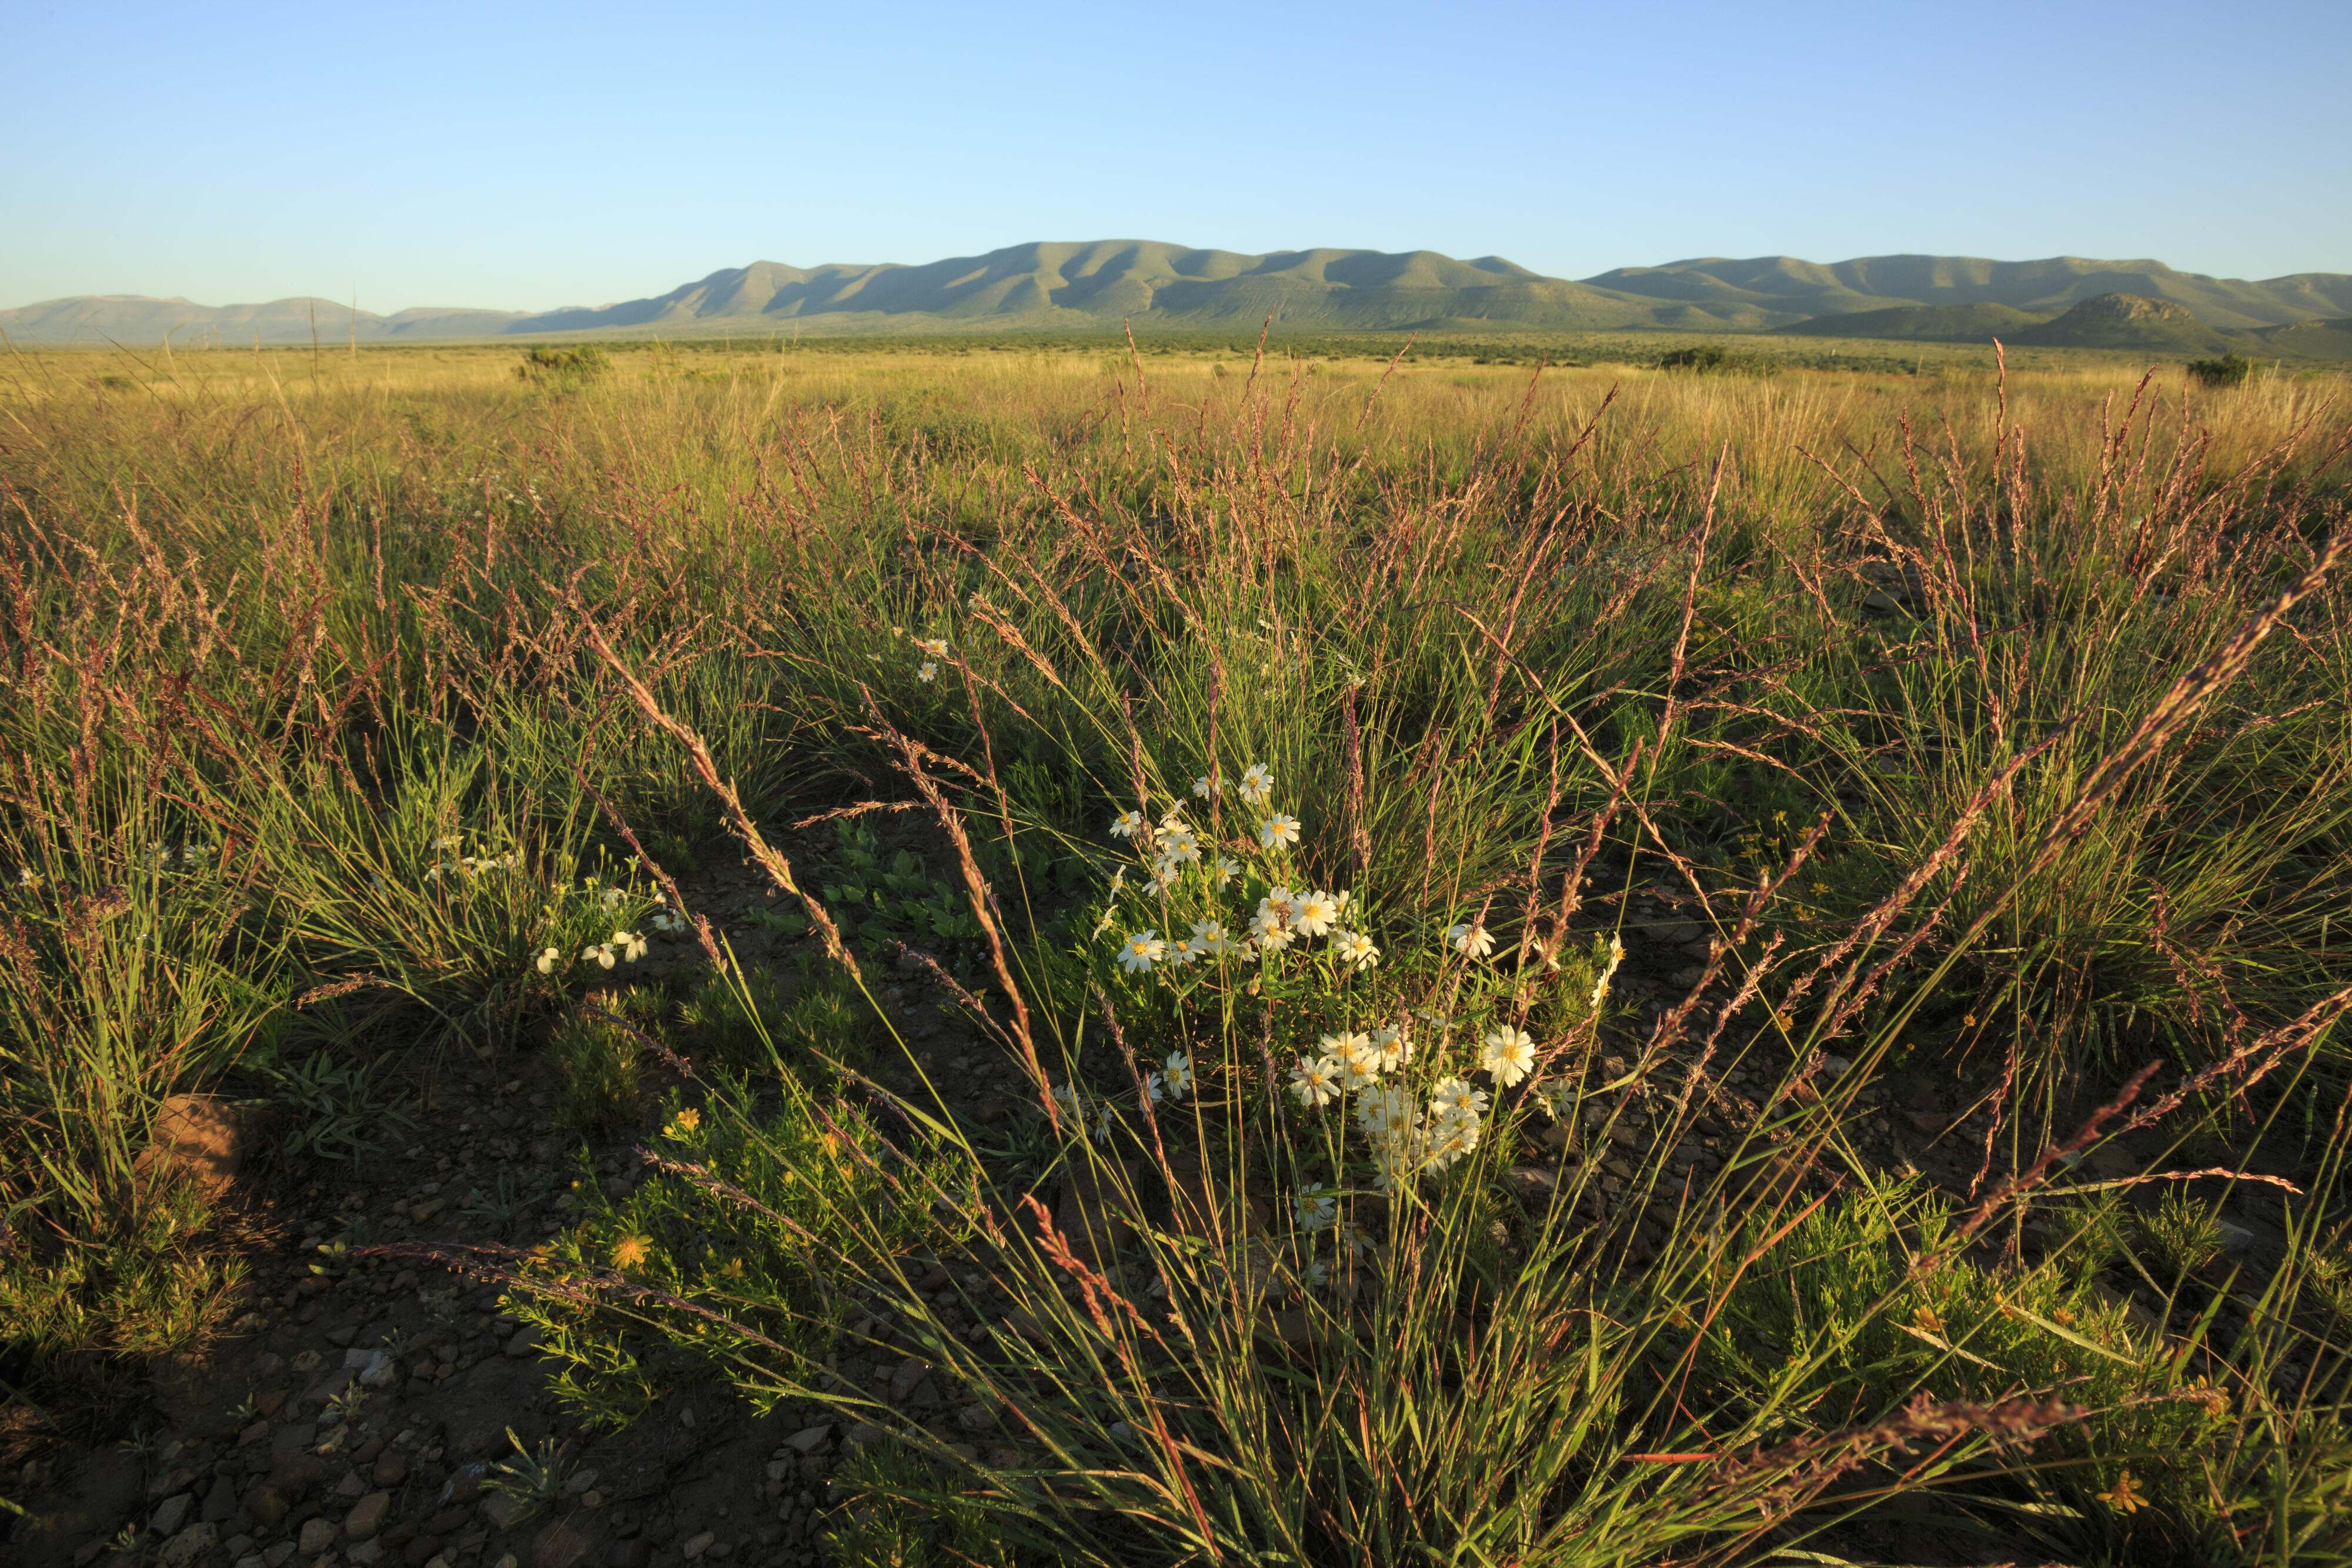 White flowers bloom in tall yellow and green prairie grass as mountains rise up in the distance.